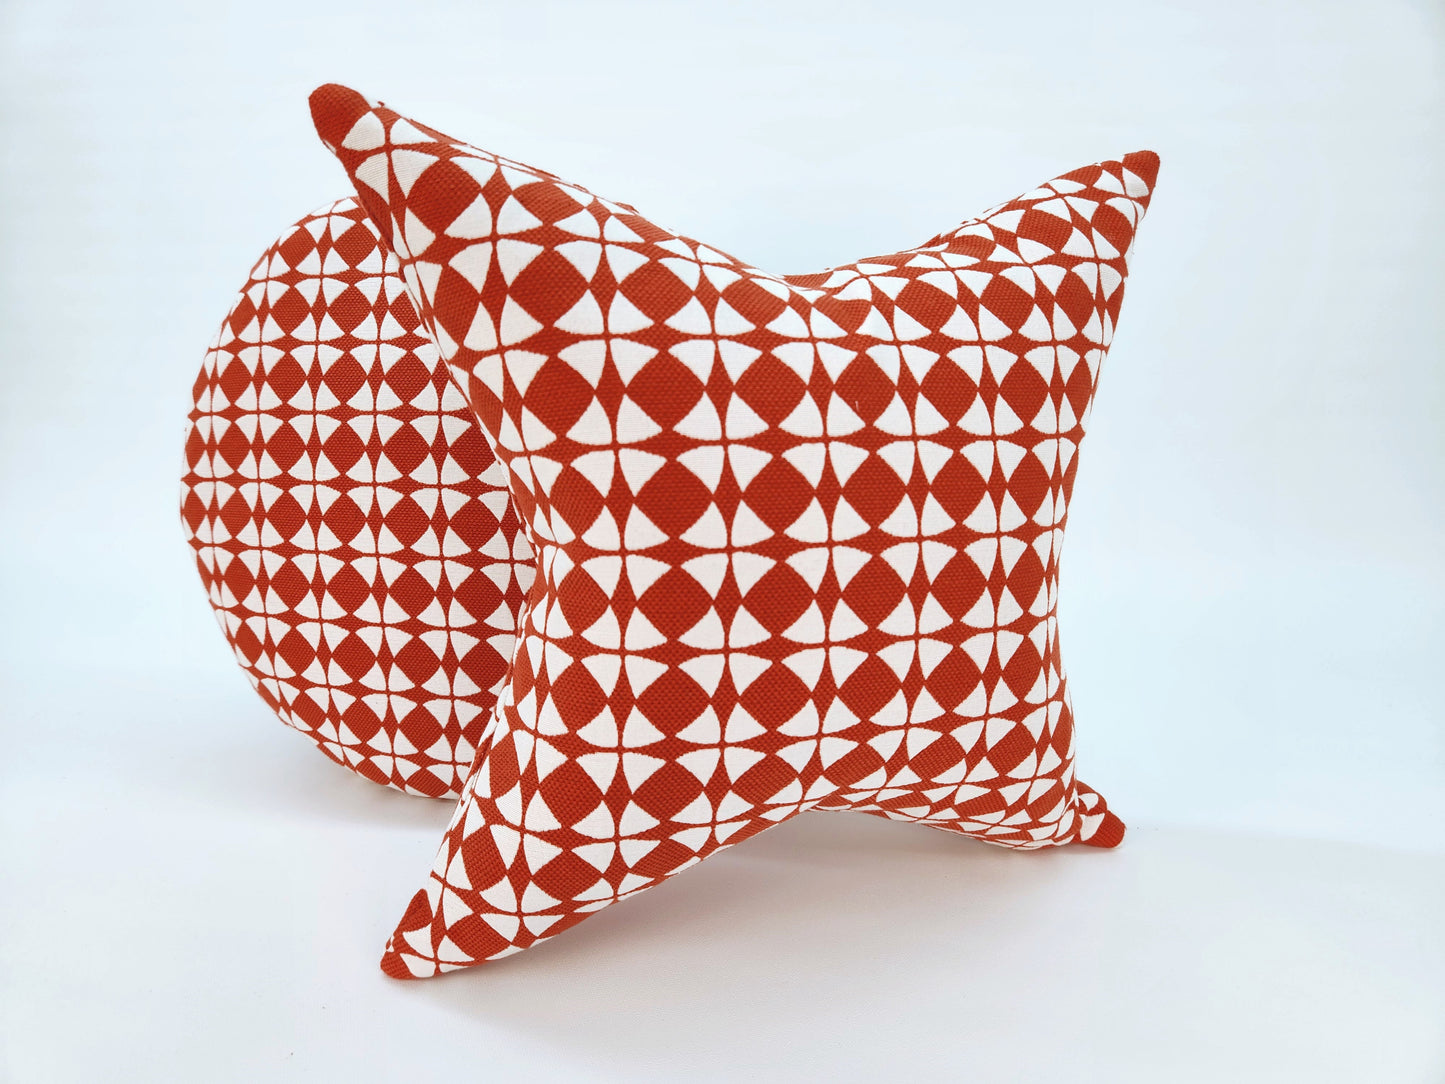 Explorer58 Star Shaped Pillow Cover, Thruster Red, with or without Feather Insert. Handmade by Houston and Scott